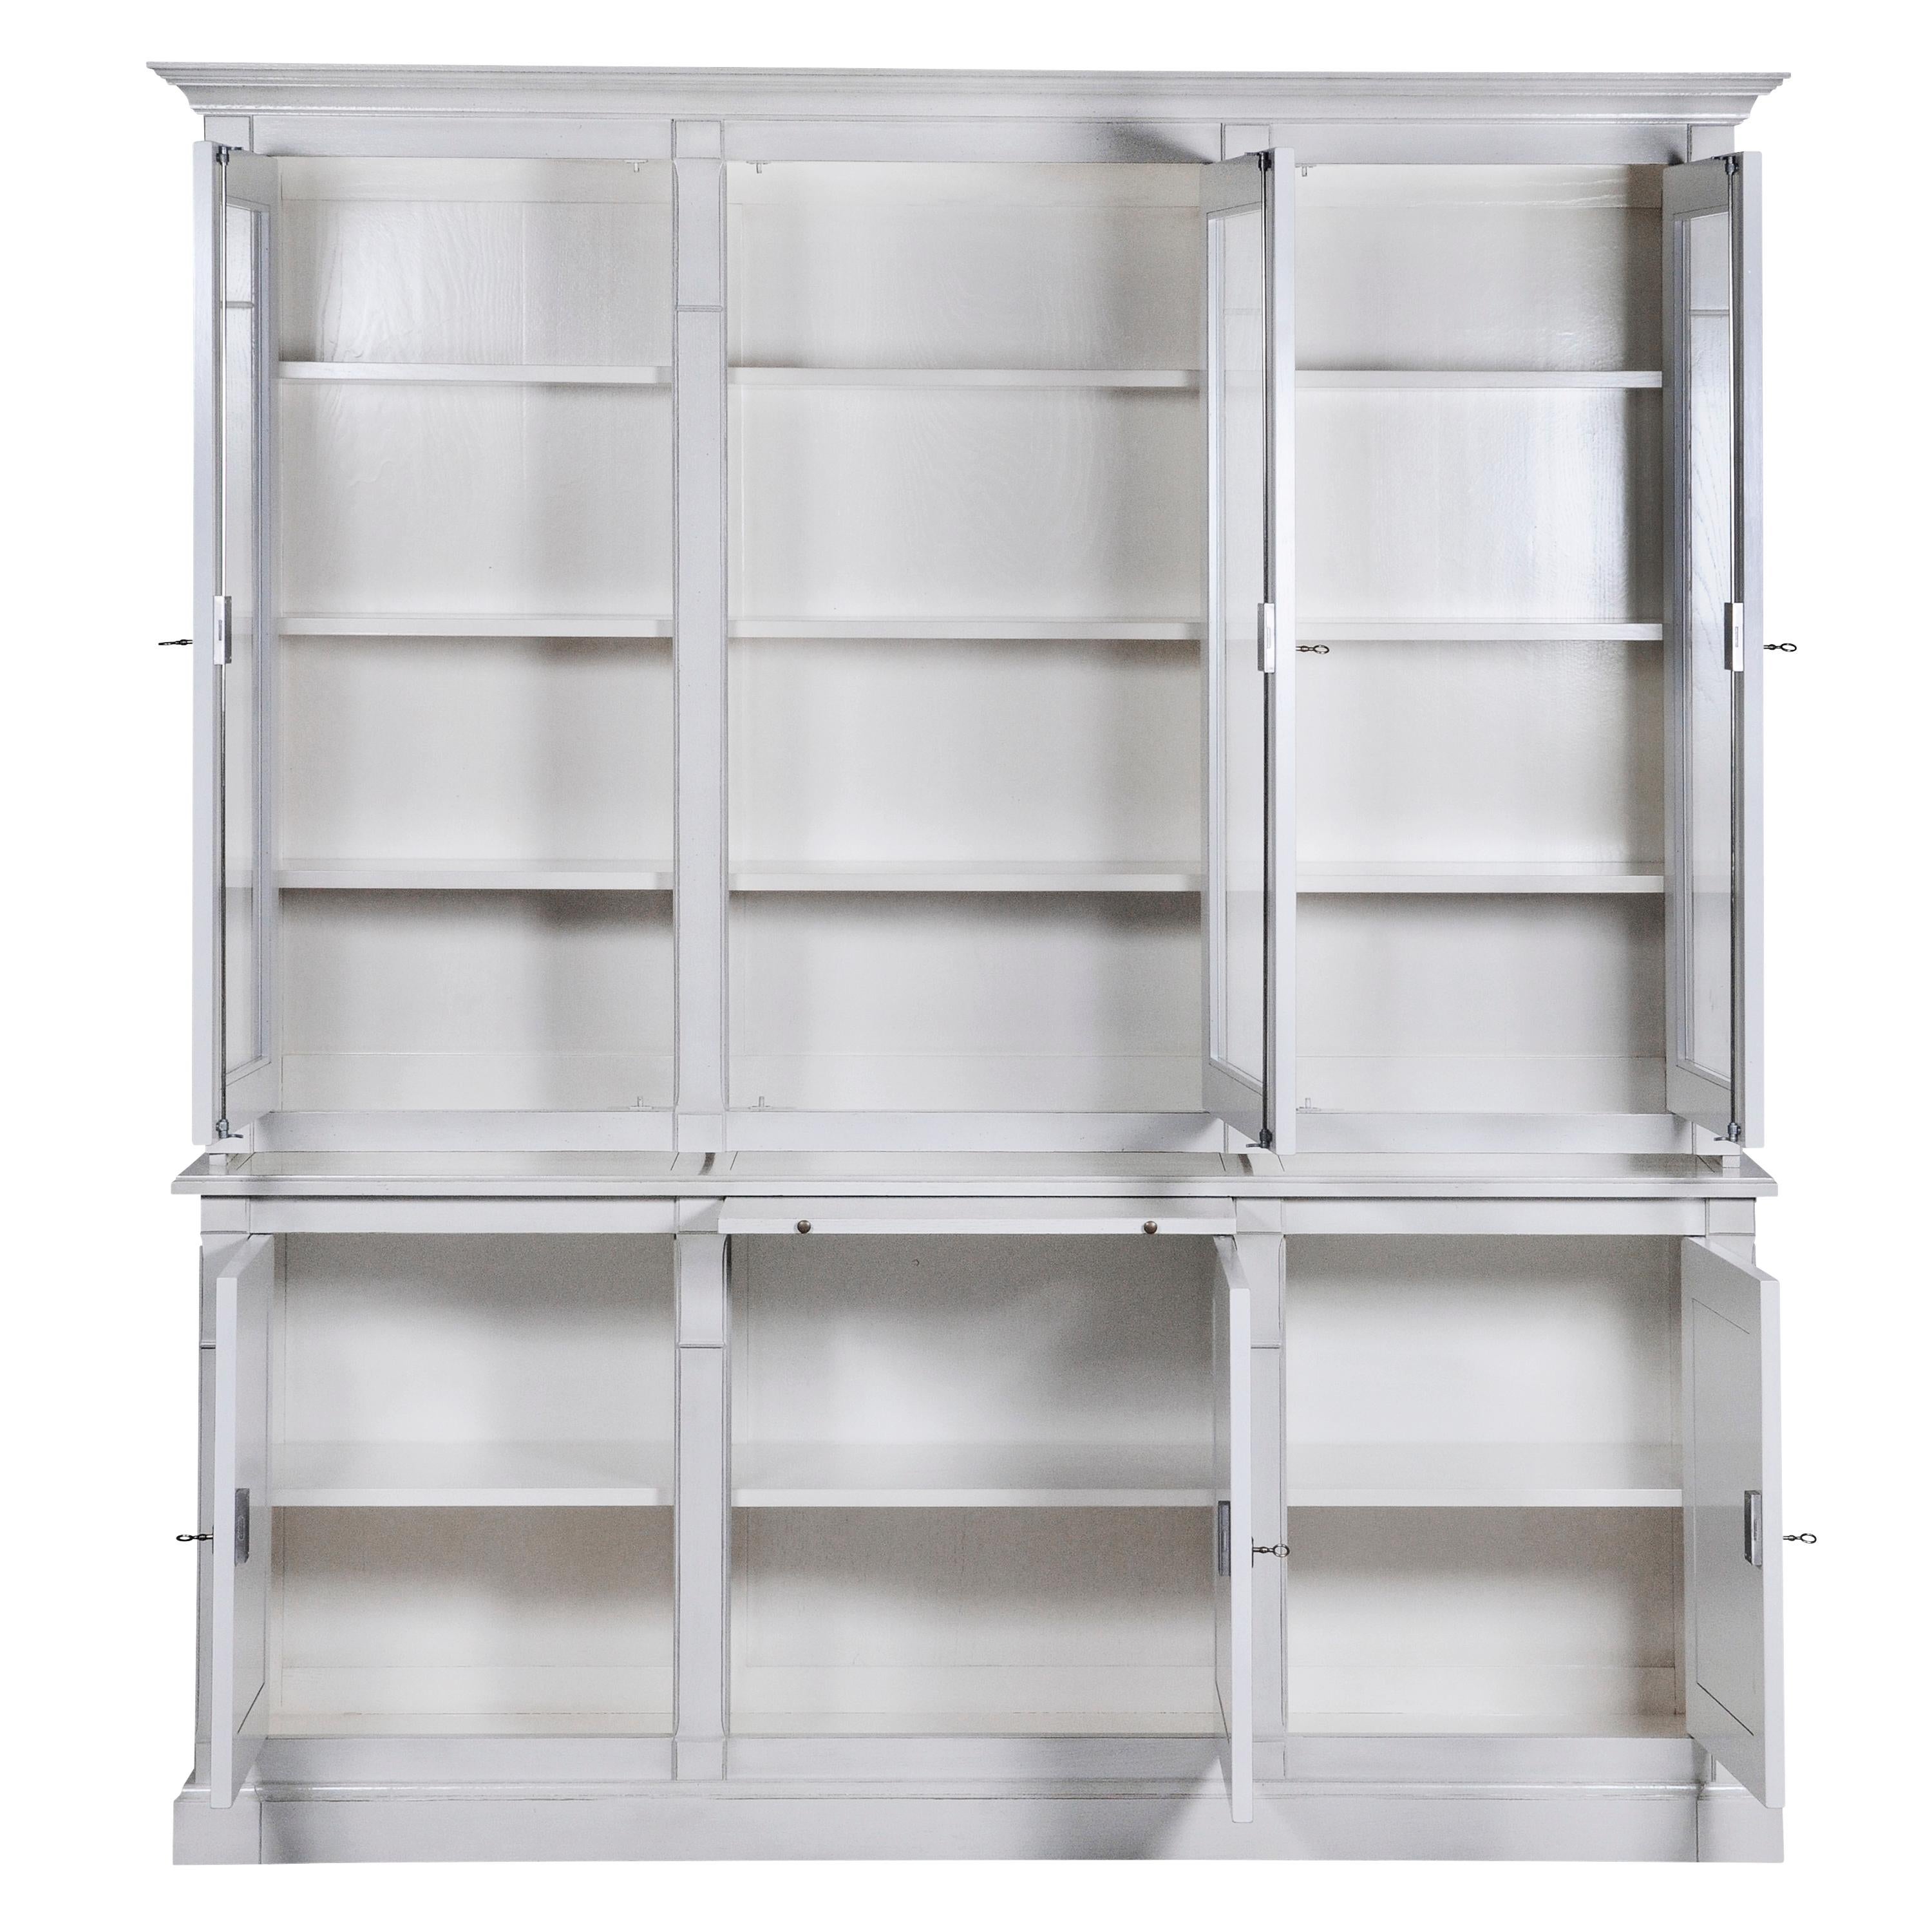 This 3 doors bookcase is a handmade reproduction of the French Directoire Style at the end of the 18th century.
This period style is remarkable with its straight, classical and timeless lines.

This piece of furniture It is made with 2 Parts. The